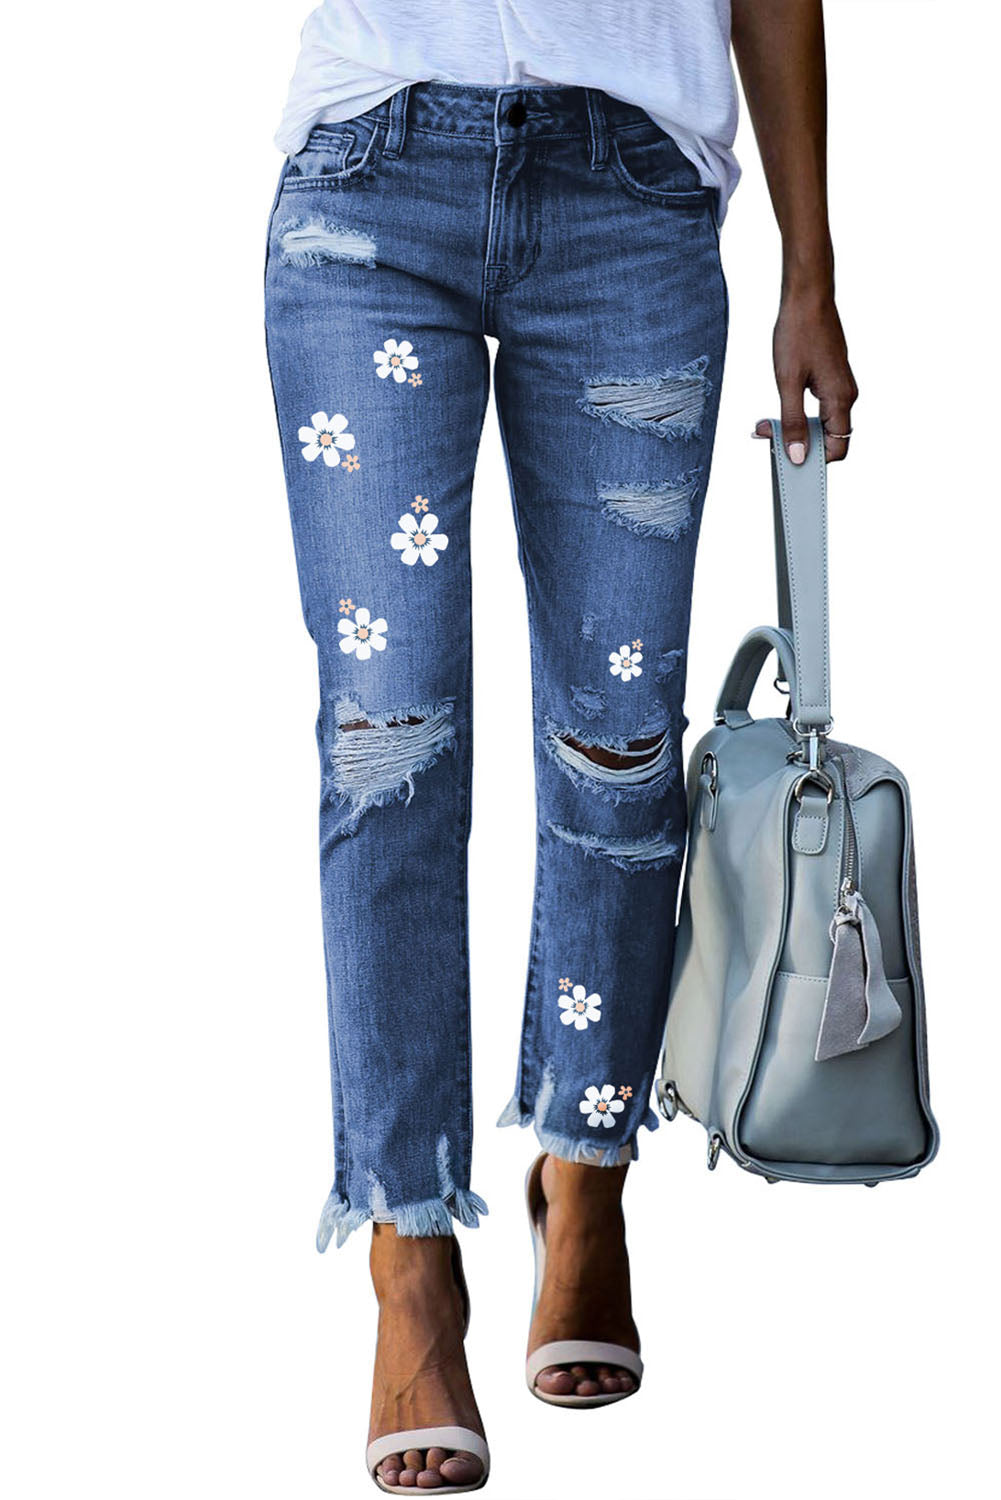 Blue Casual Floral Skull Print Jean For Women LC787685-5